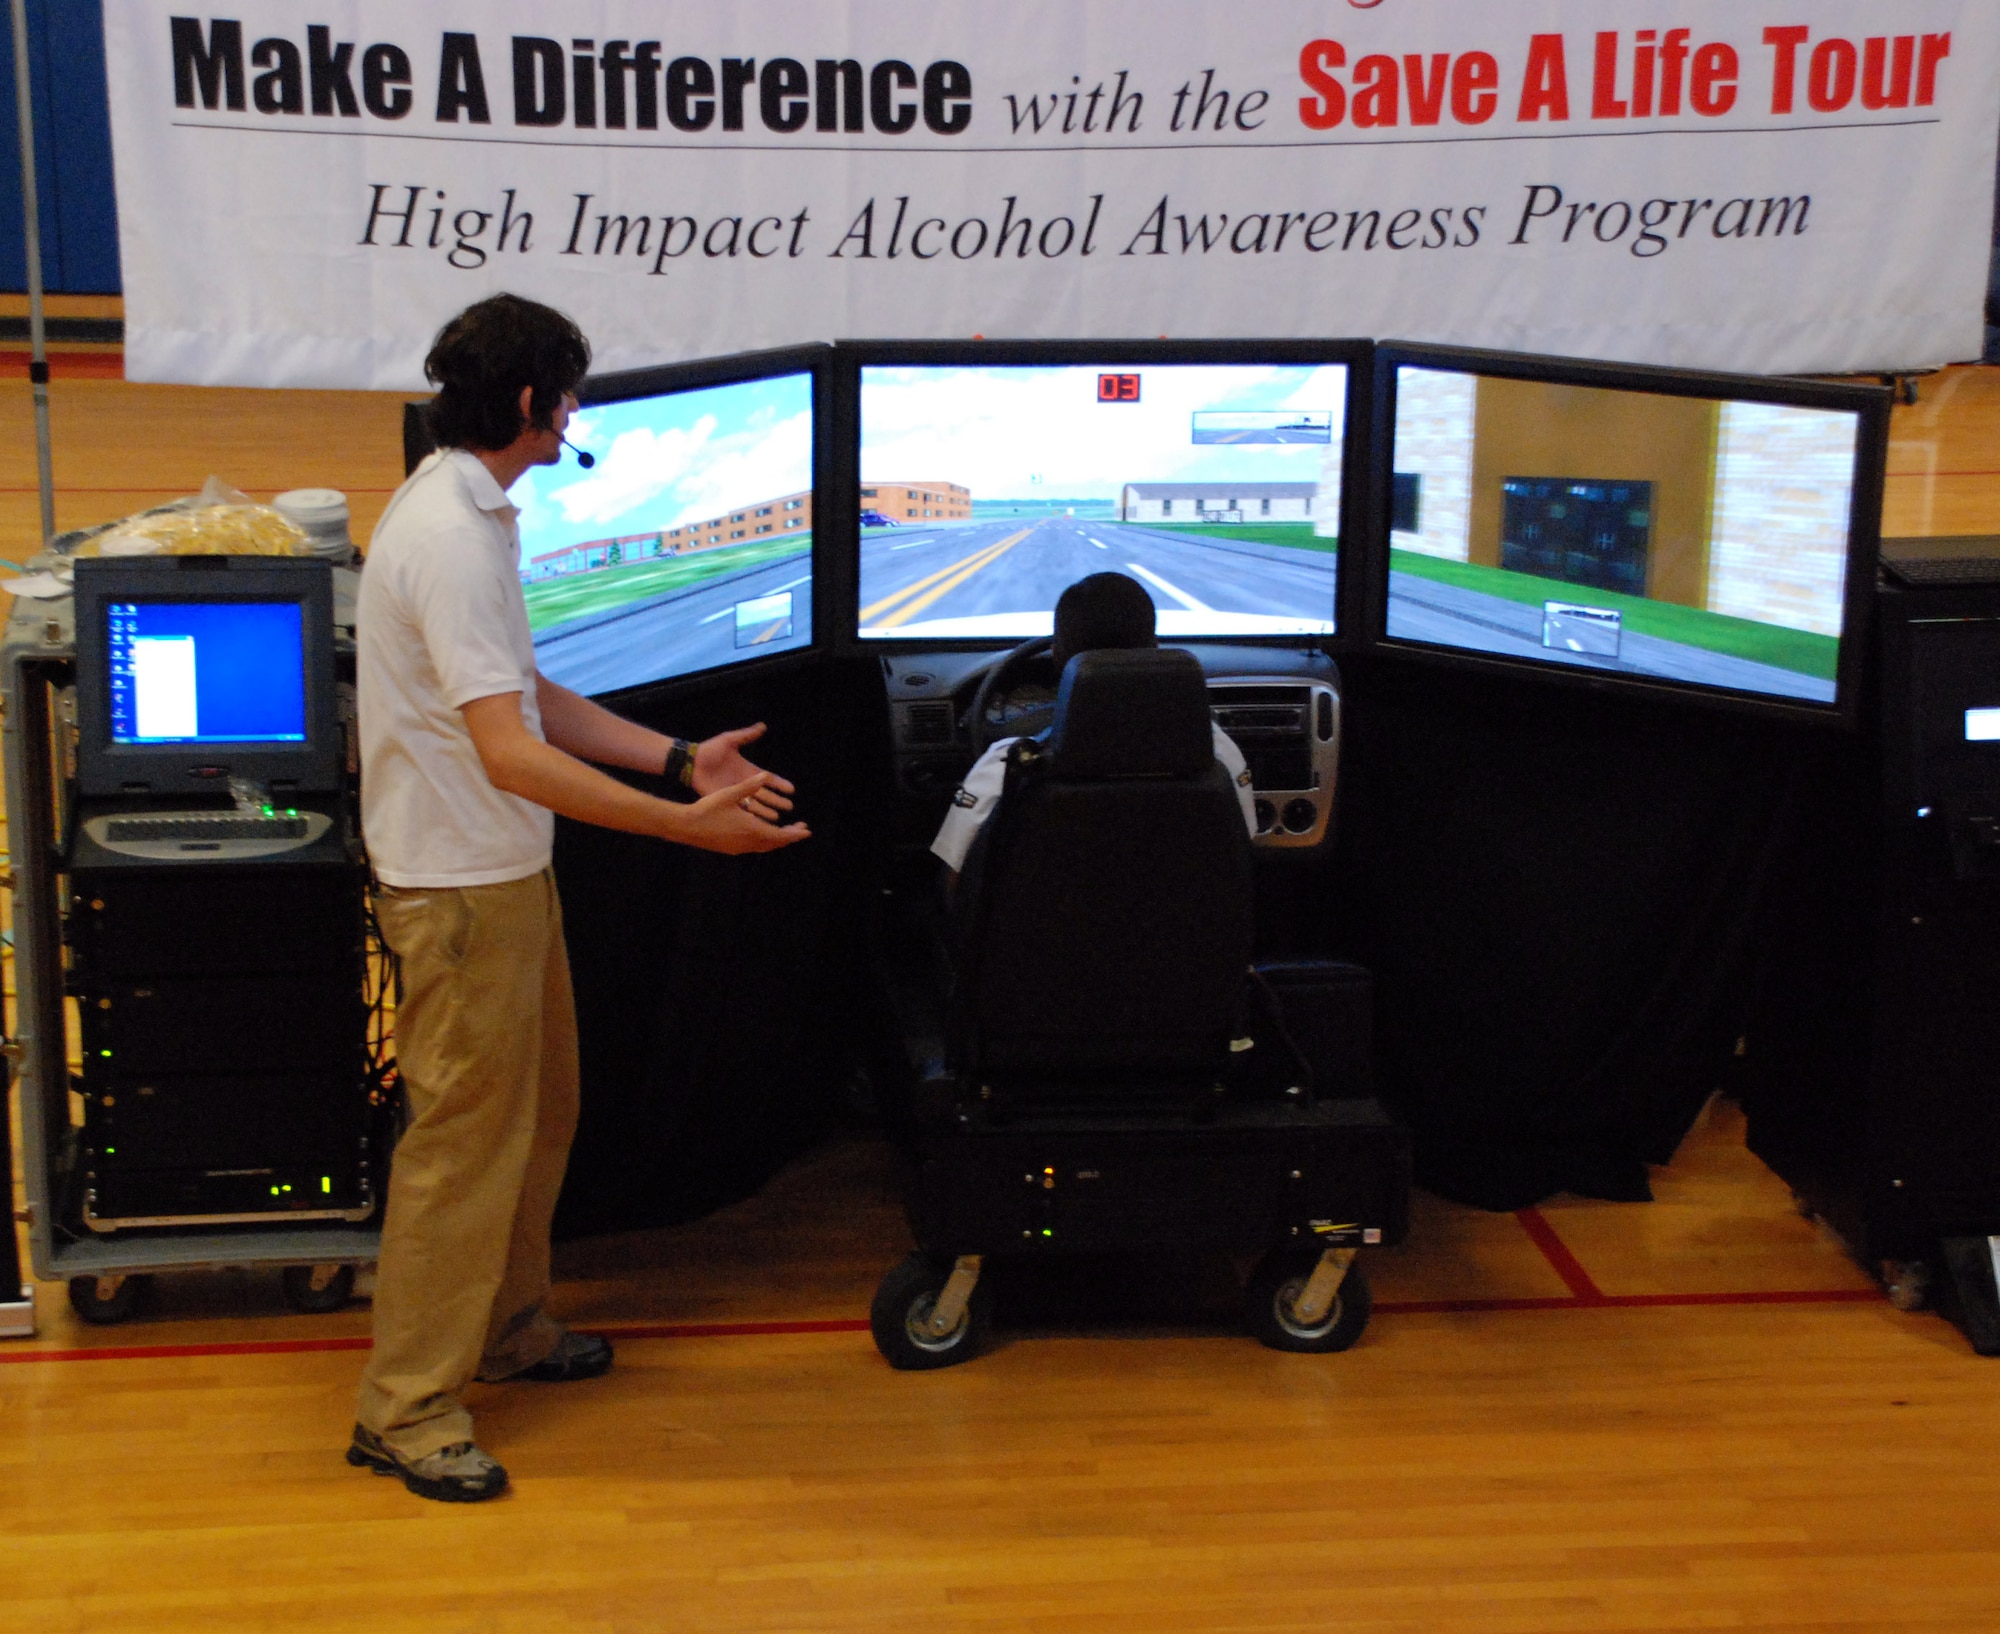 LAUGHLIN AIR FORCE BASE, Texas -- Brian Beldyga, "Save a Life" anti-drinking and driving program host, instructs Airman 1st Class Tammy Marshall on the use of the program's drunk driving simulator during a presentation in Laughlin's "old gym' Sept. 29.  (U.S. Air Force photo)